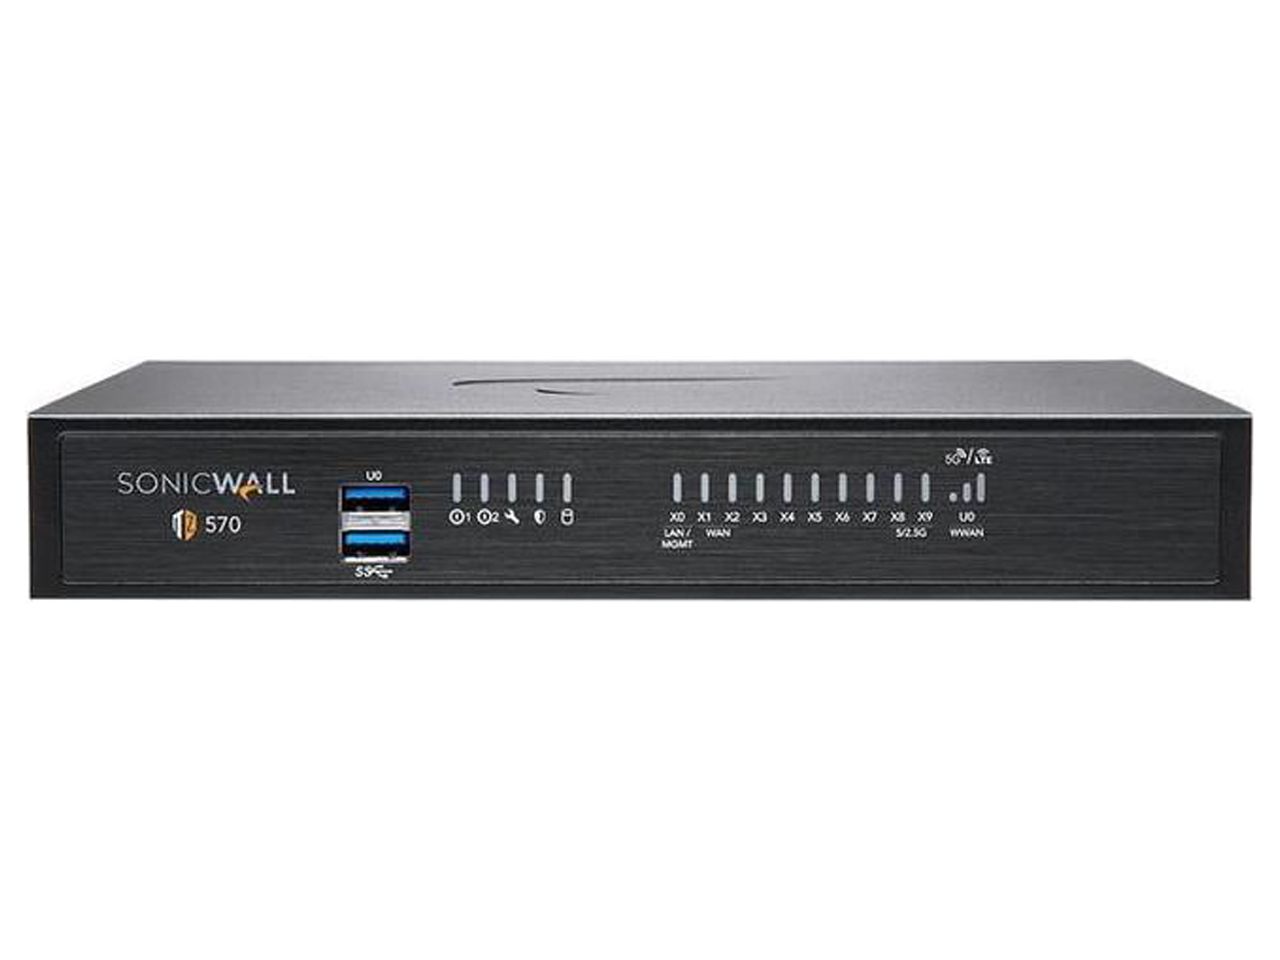 SonicWall TZ570 Network Security Appliance and 2YR Secure Upgrade Plus Advanced Edition (02-SSC-5686) - image 2 of 8